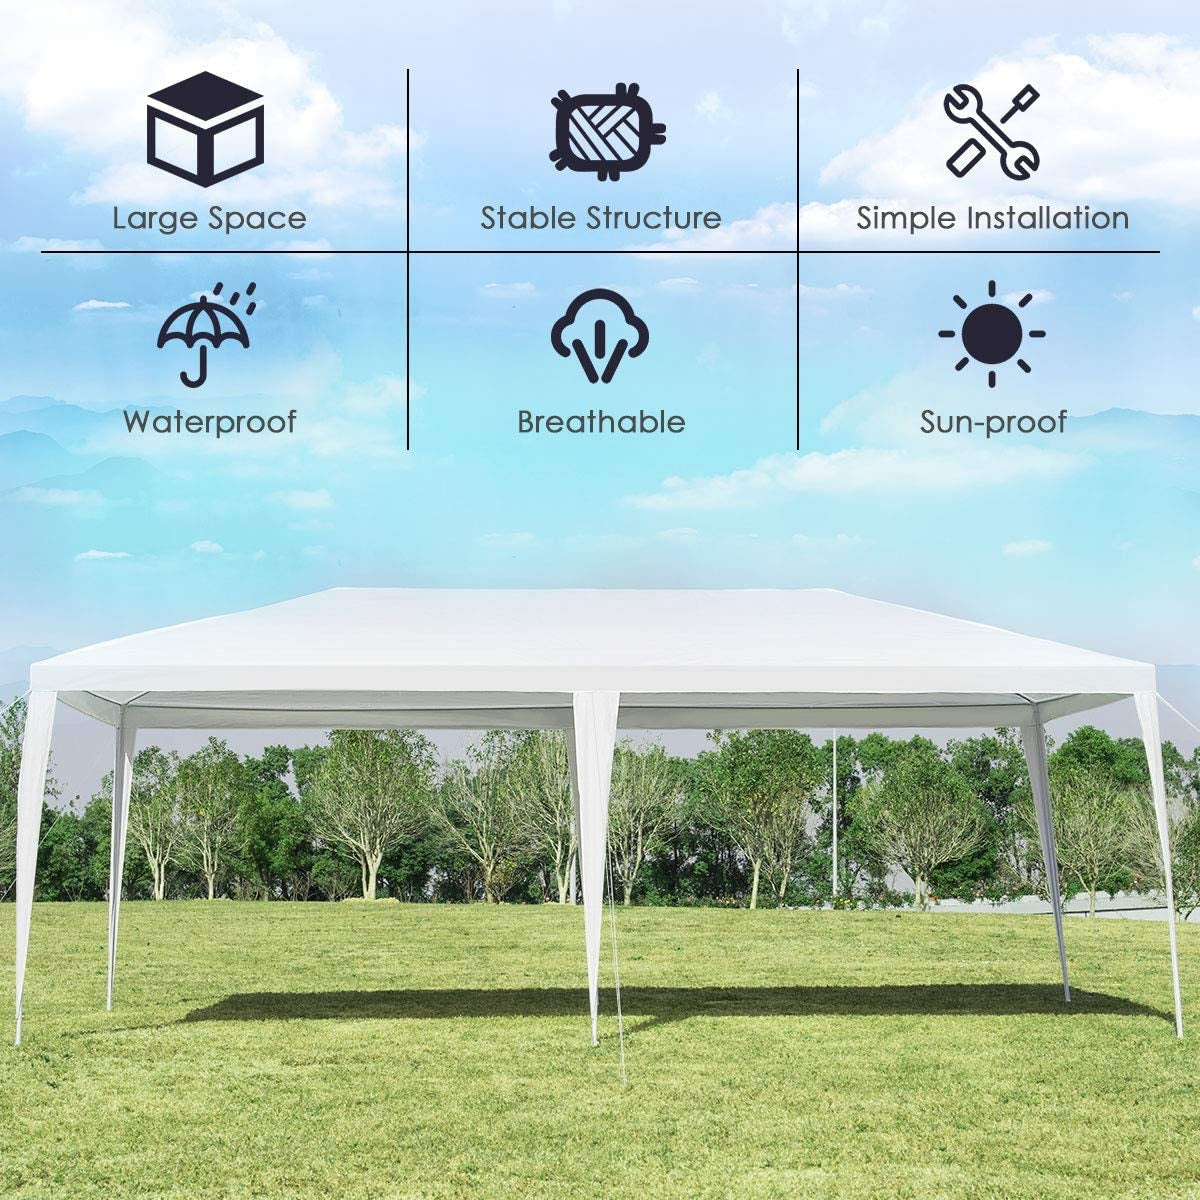 Weatherproof and Sun-Resistant: Don't let the elements spoil your outdoor activities. Our gazebo features a waterproof and sun-resistant top, providing reliable temporary shade even on the sunniest days.